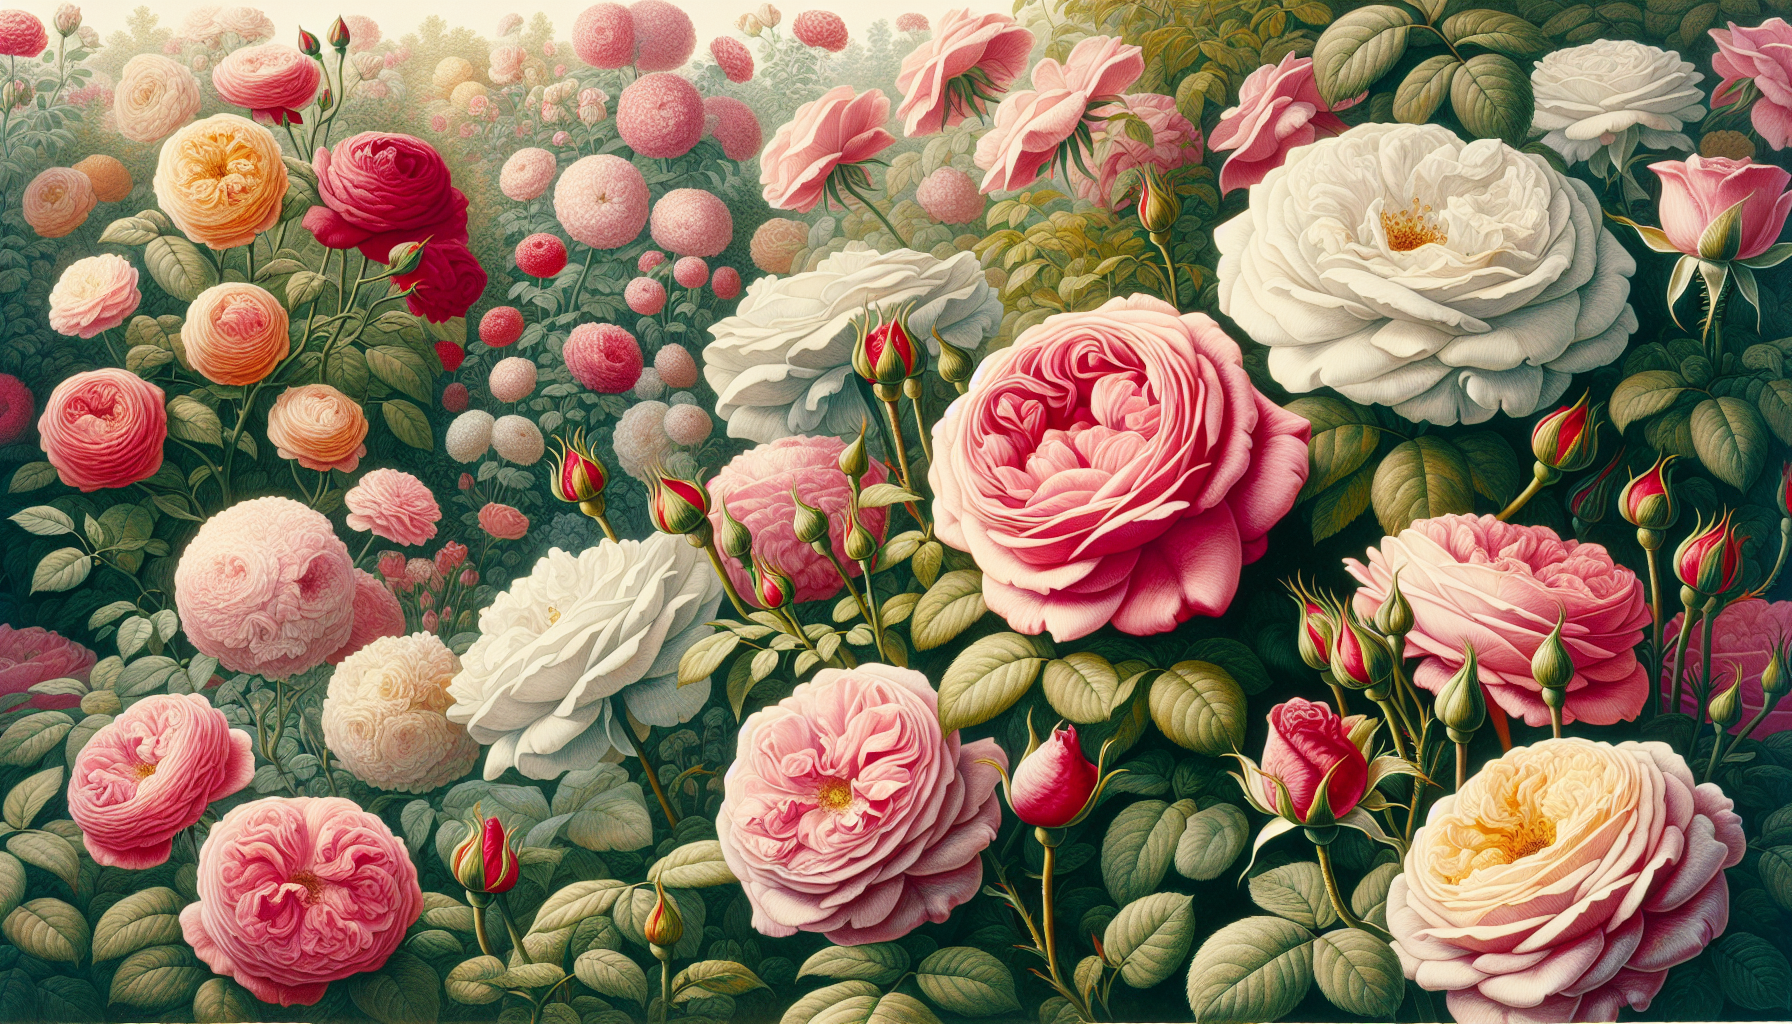 Illustration of various types of roses including rosa centifolia